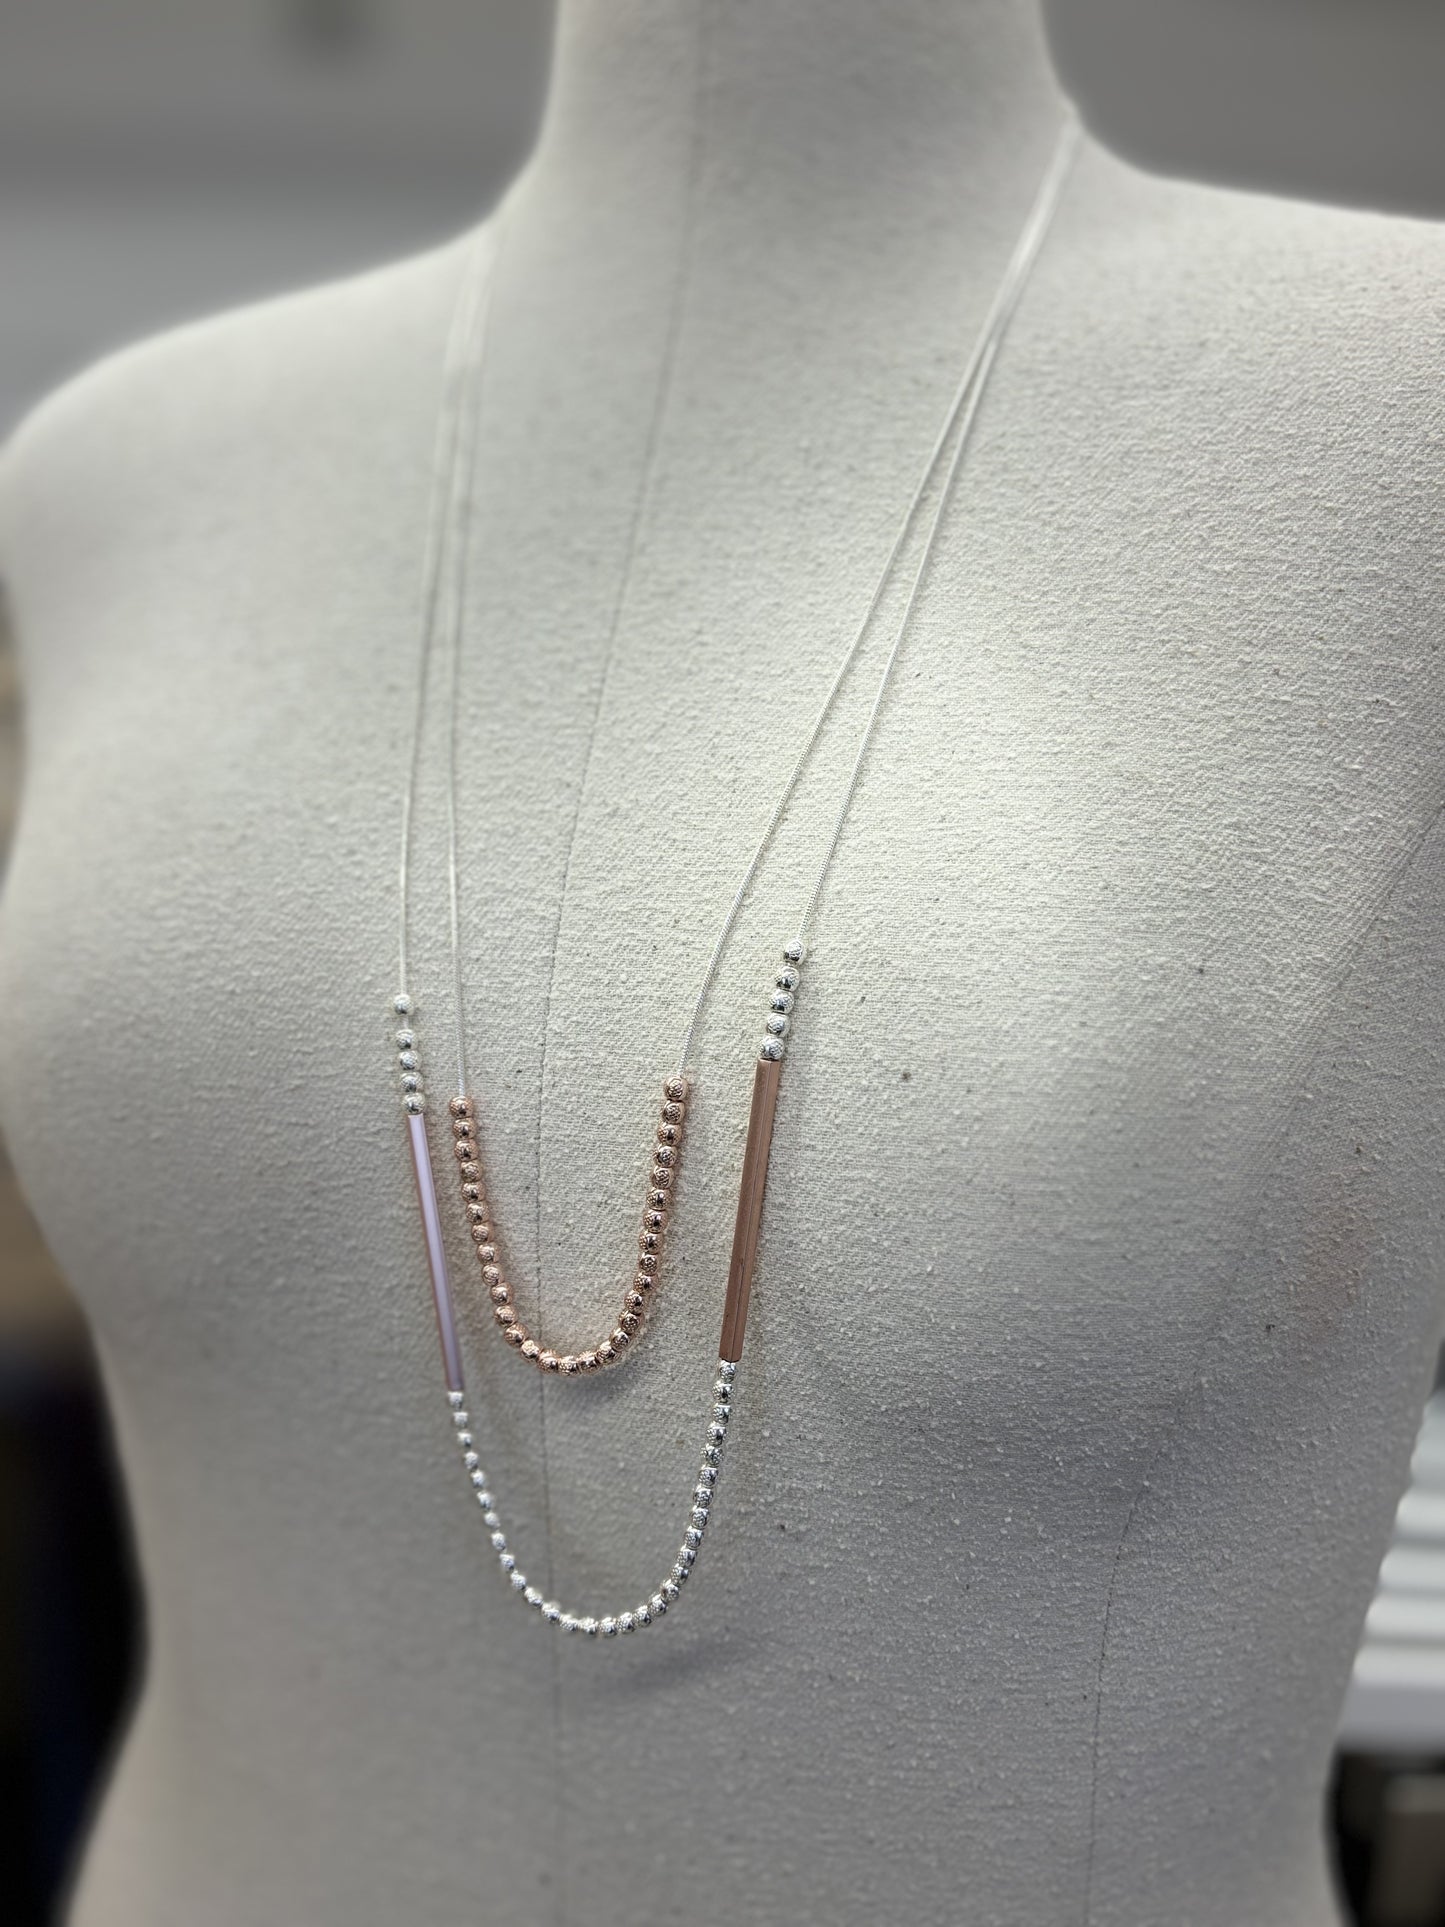 LONG NECKLACE | DOUBLE LAYERED. ROSE GOLD & SILVER